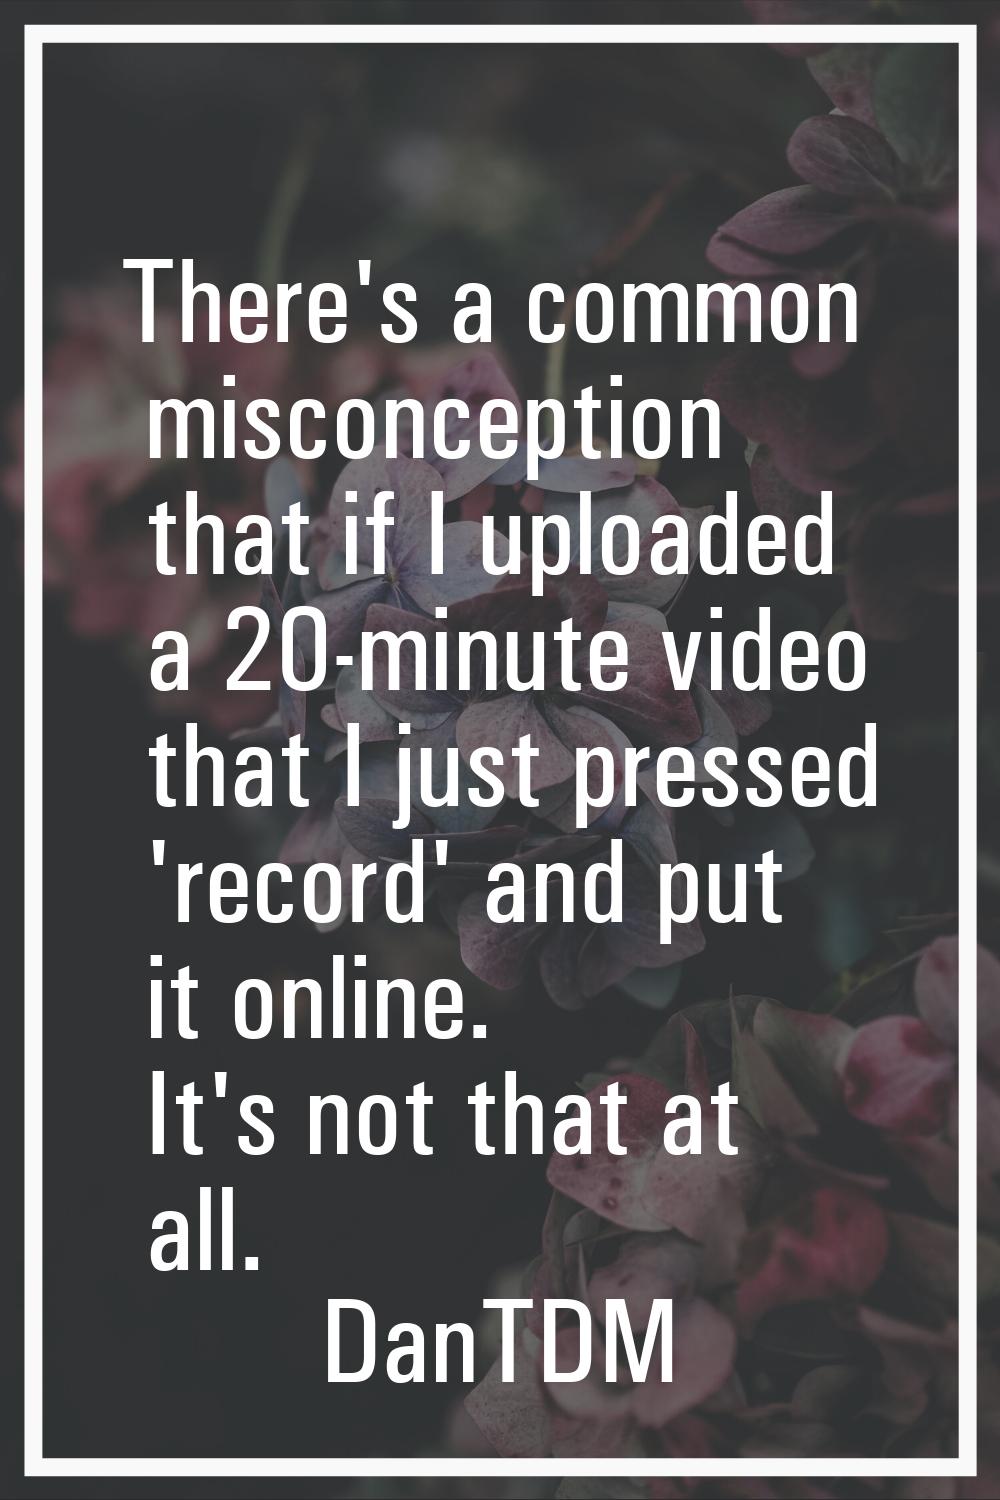 There's a common misconception that if I uploaded a 20-minute video that I just pressed 'record' an